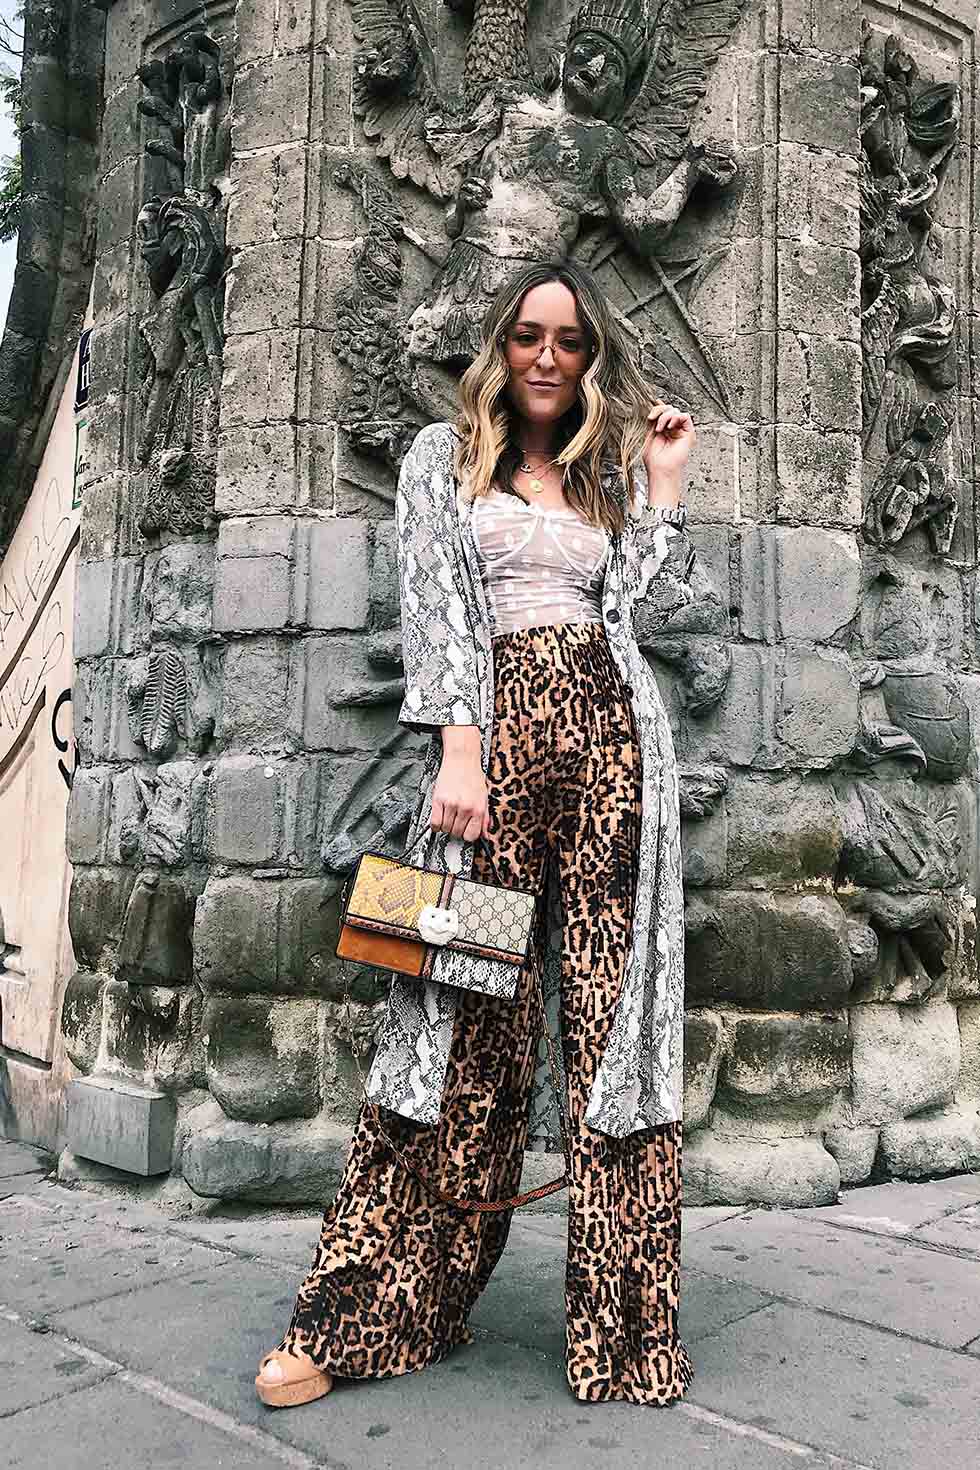 Leopard print a trend for forever and ever